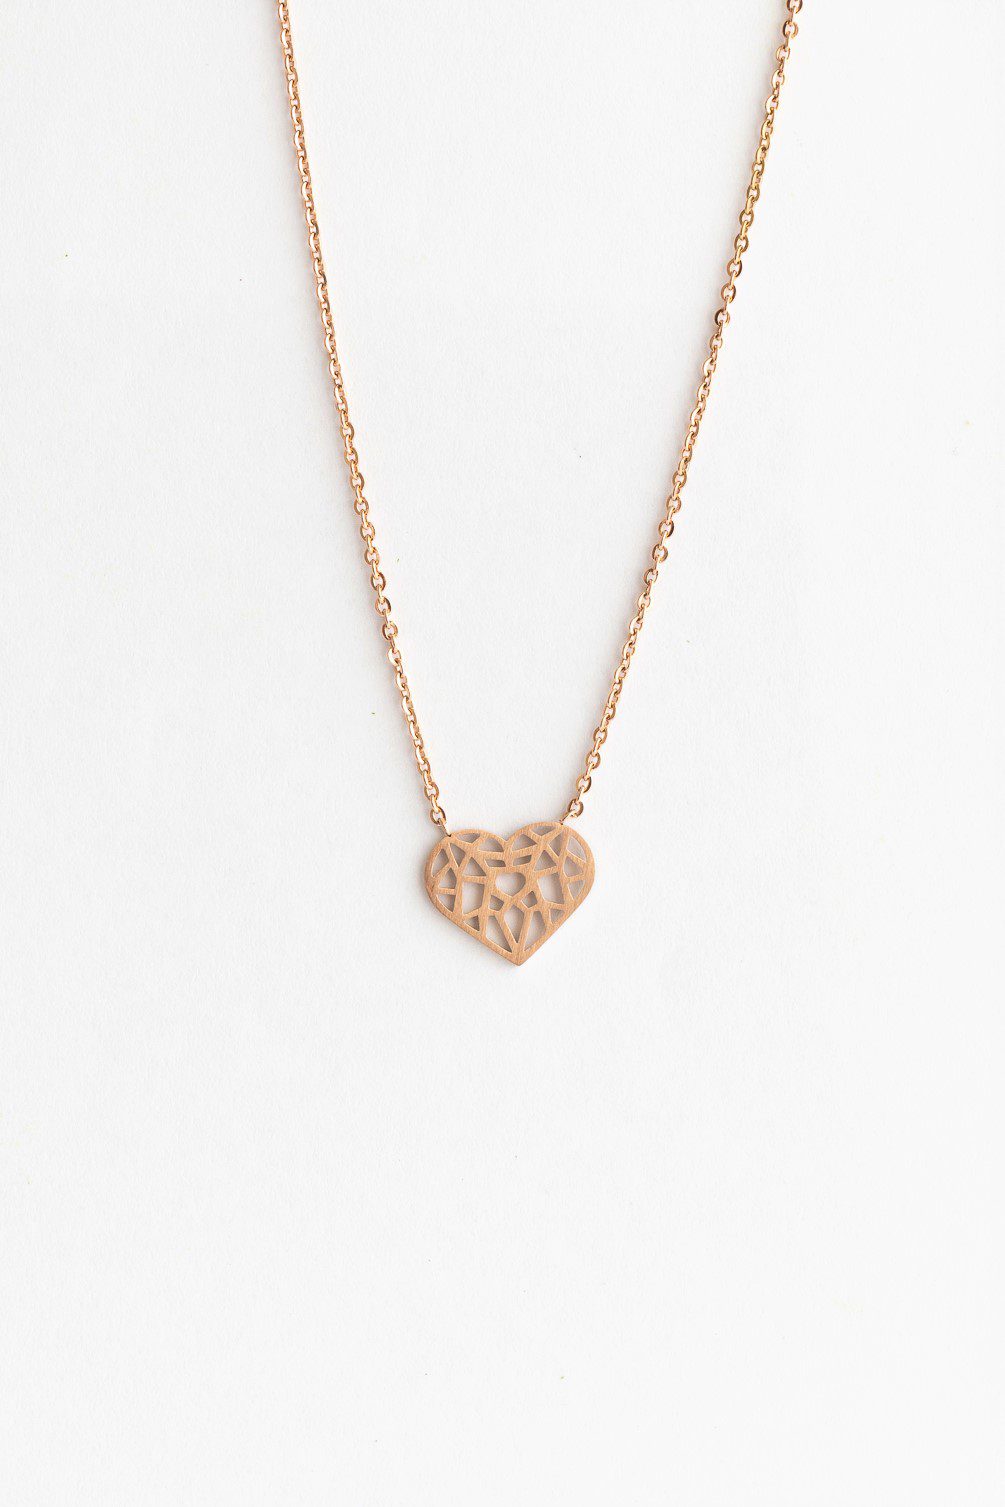 Amore Rose Necklace